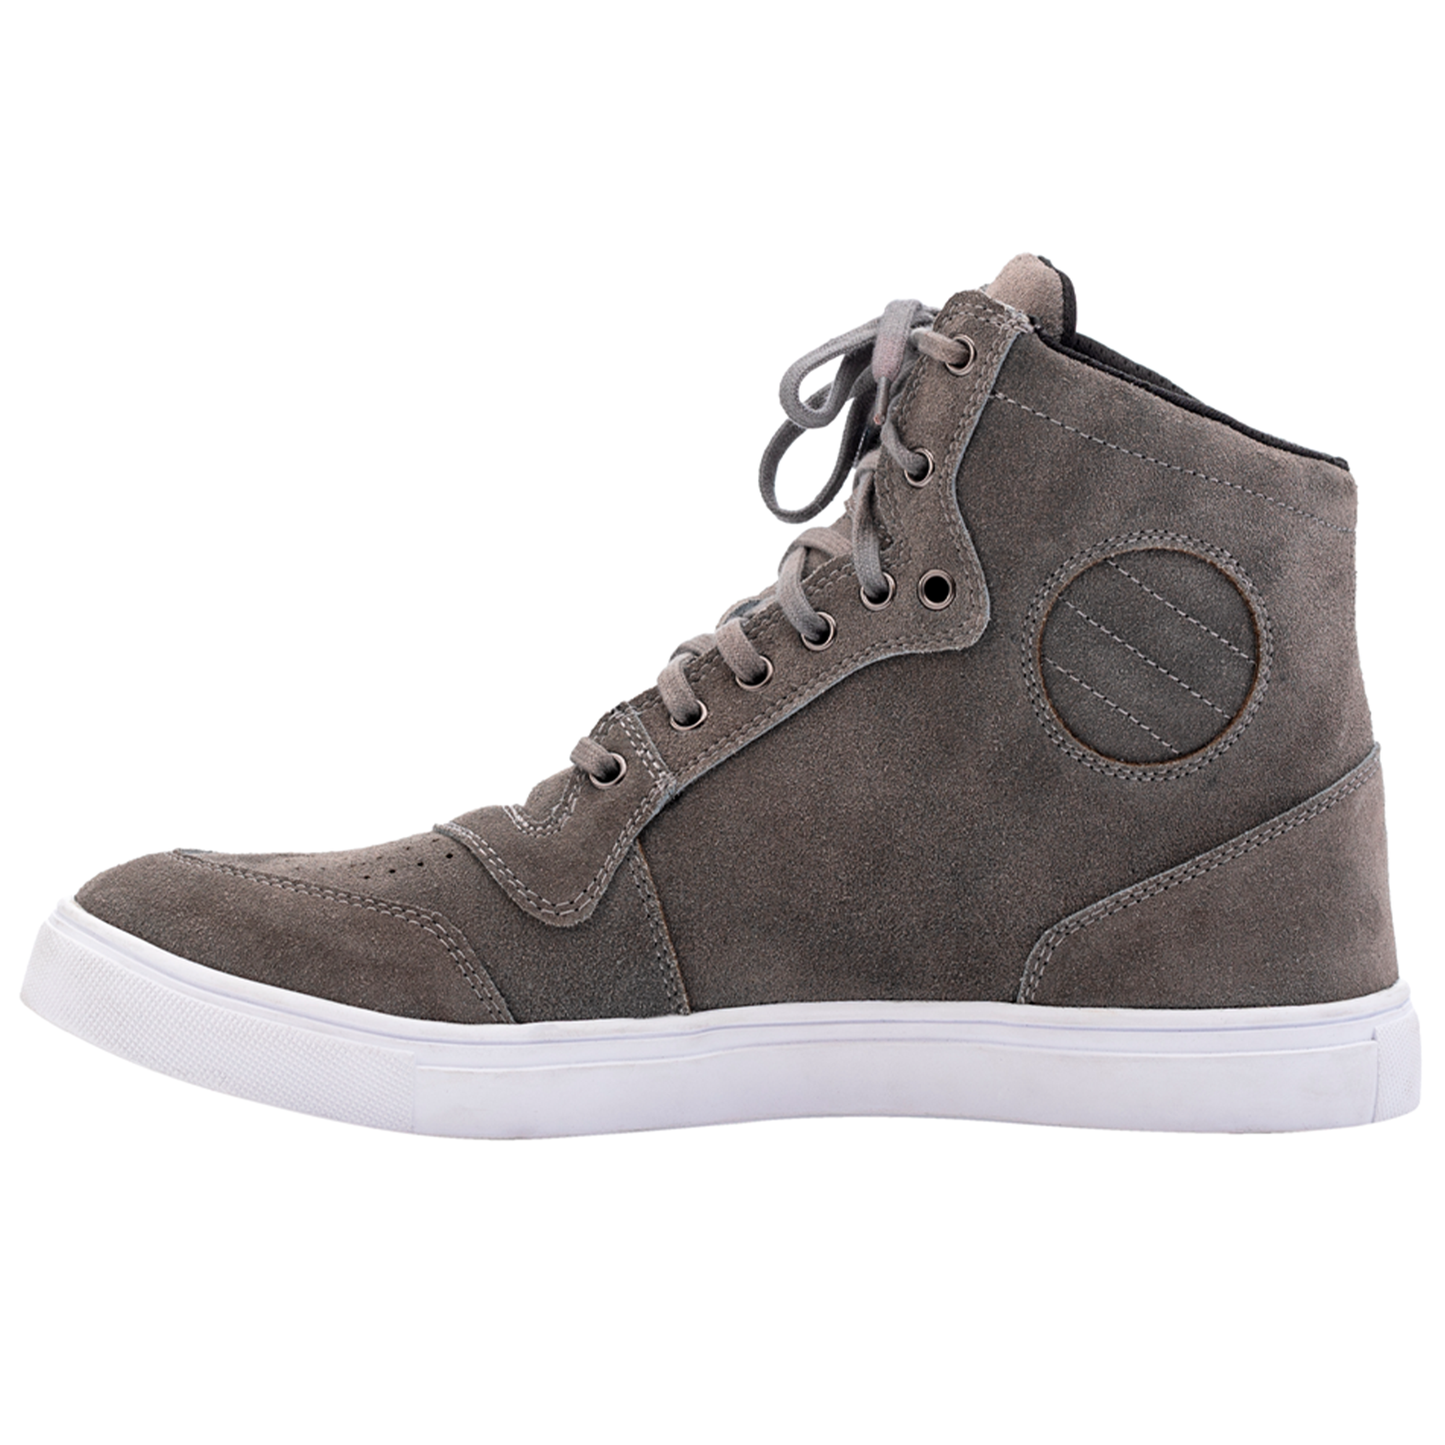 RST HiTop Moto Sneaker Ladies (CE) Boots - Grey Suede